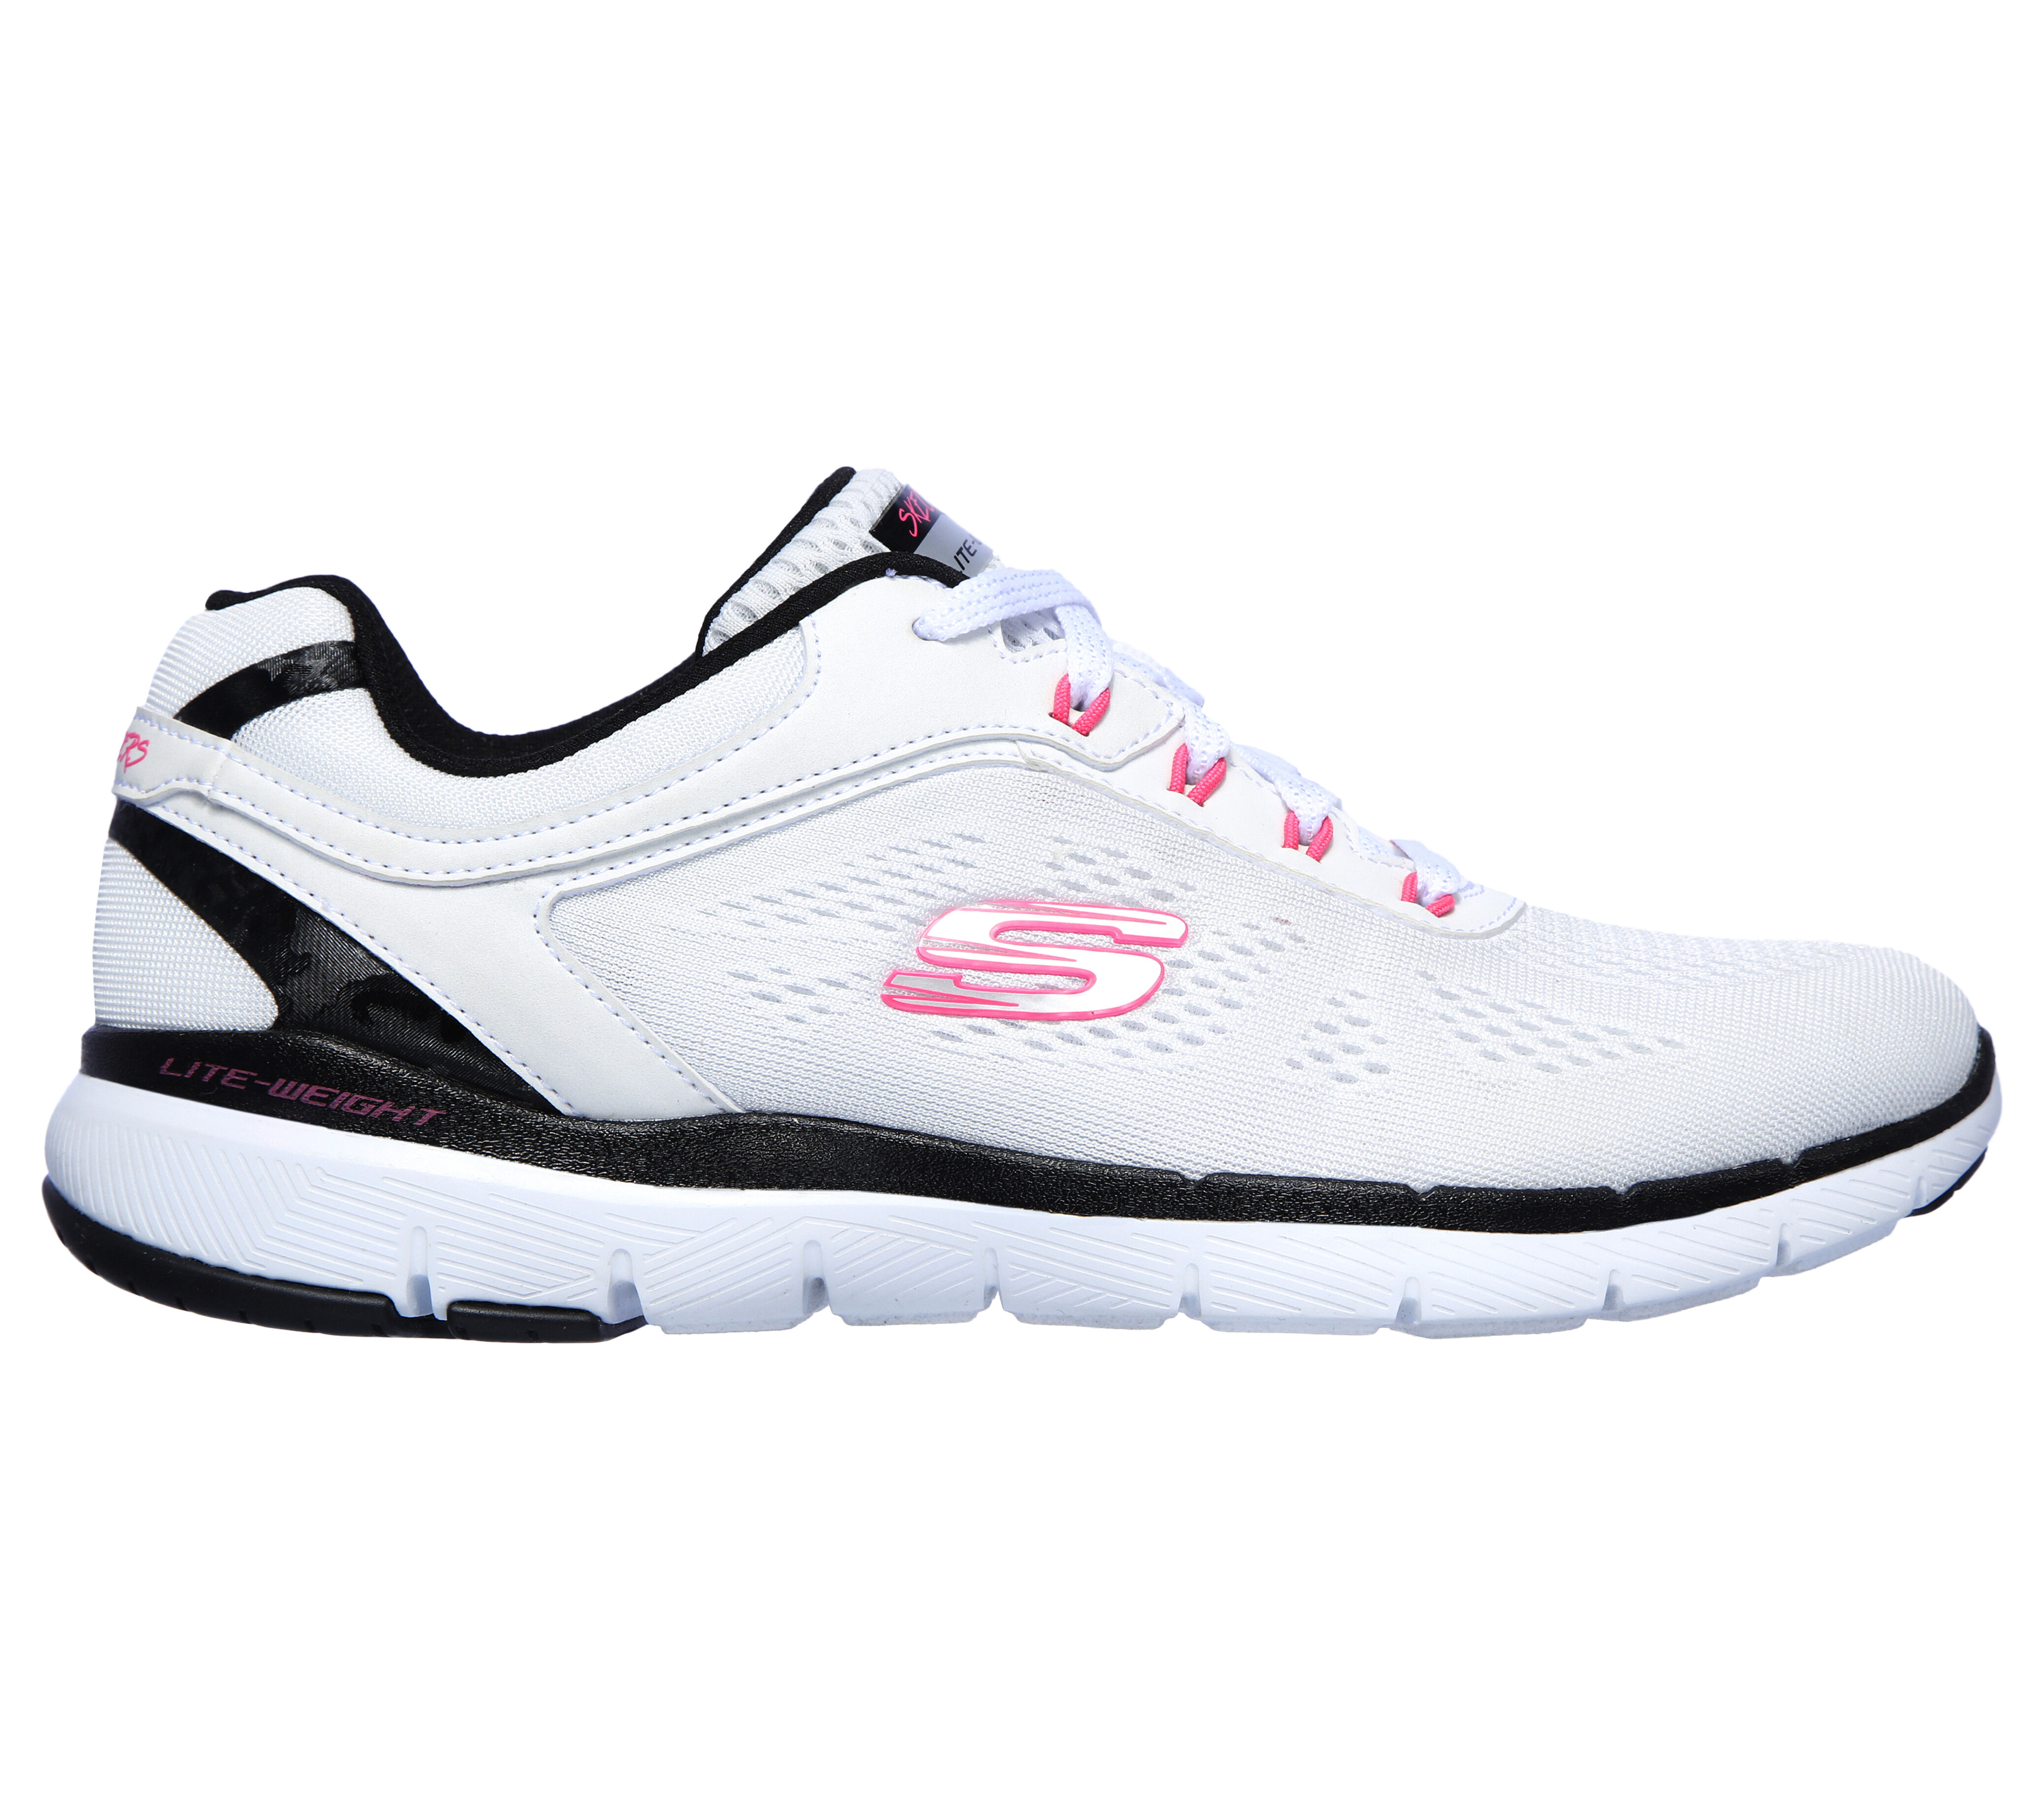 skechers flex appeal 3.0 with air cooled memory foam